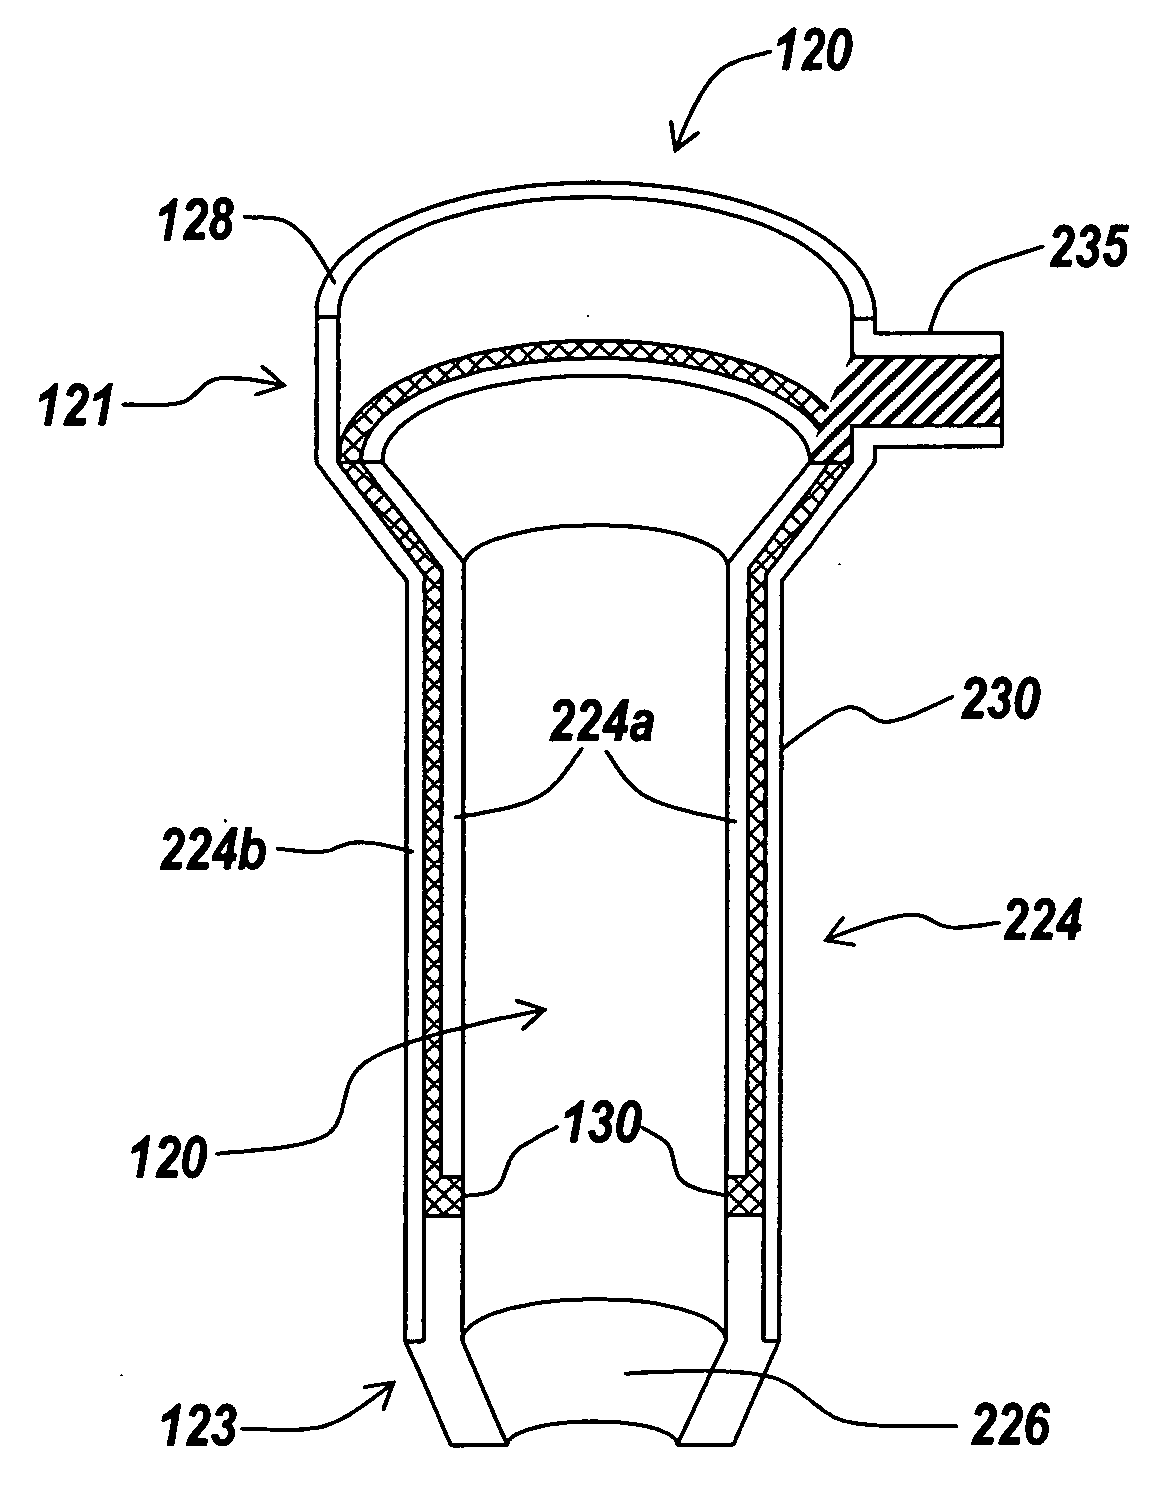 Illuminated surgical access system including a surgical access device and integrated light emitter